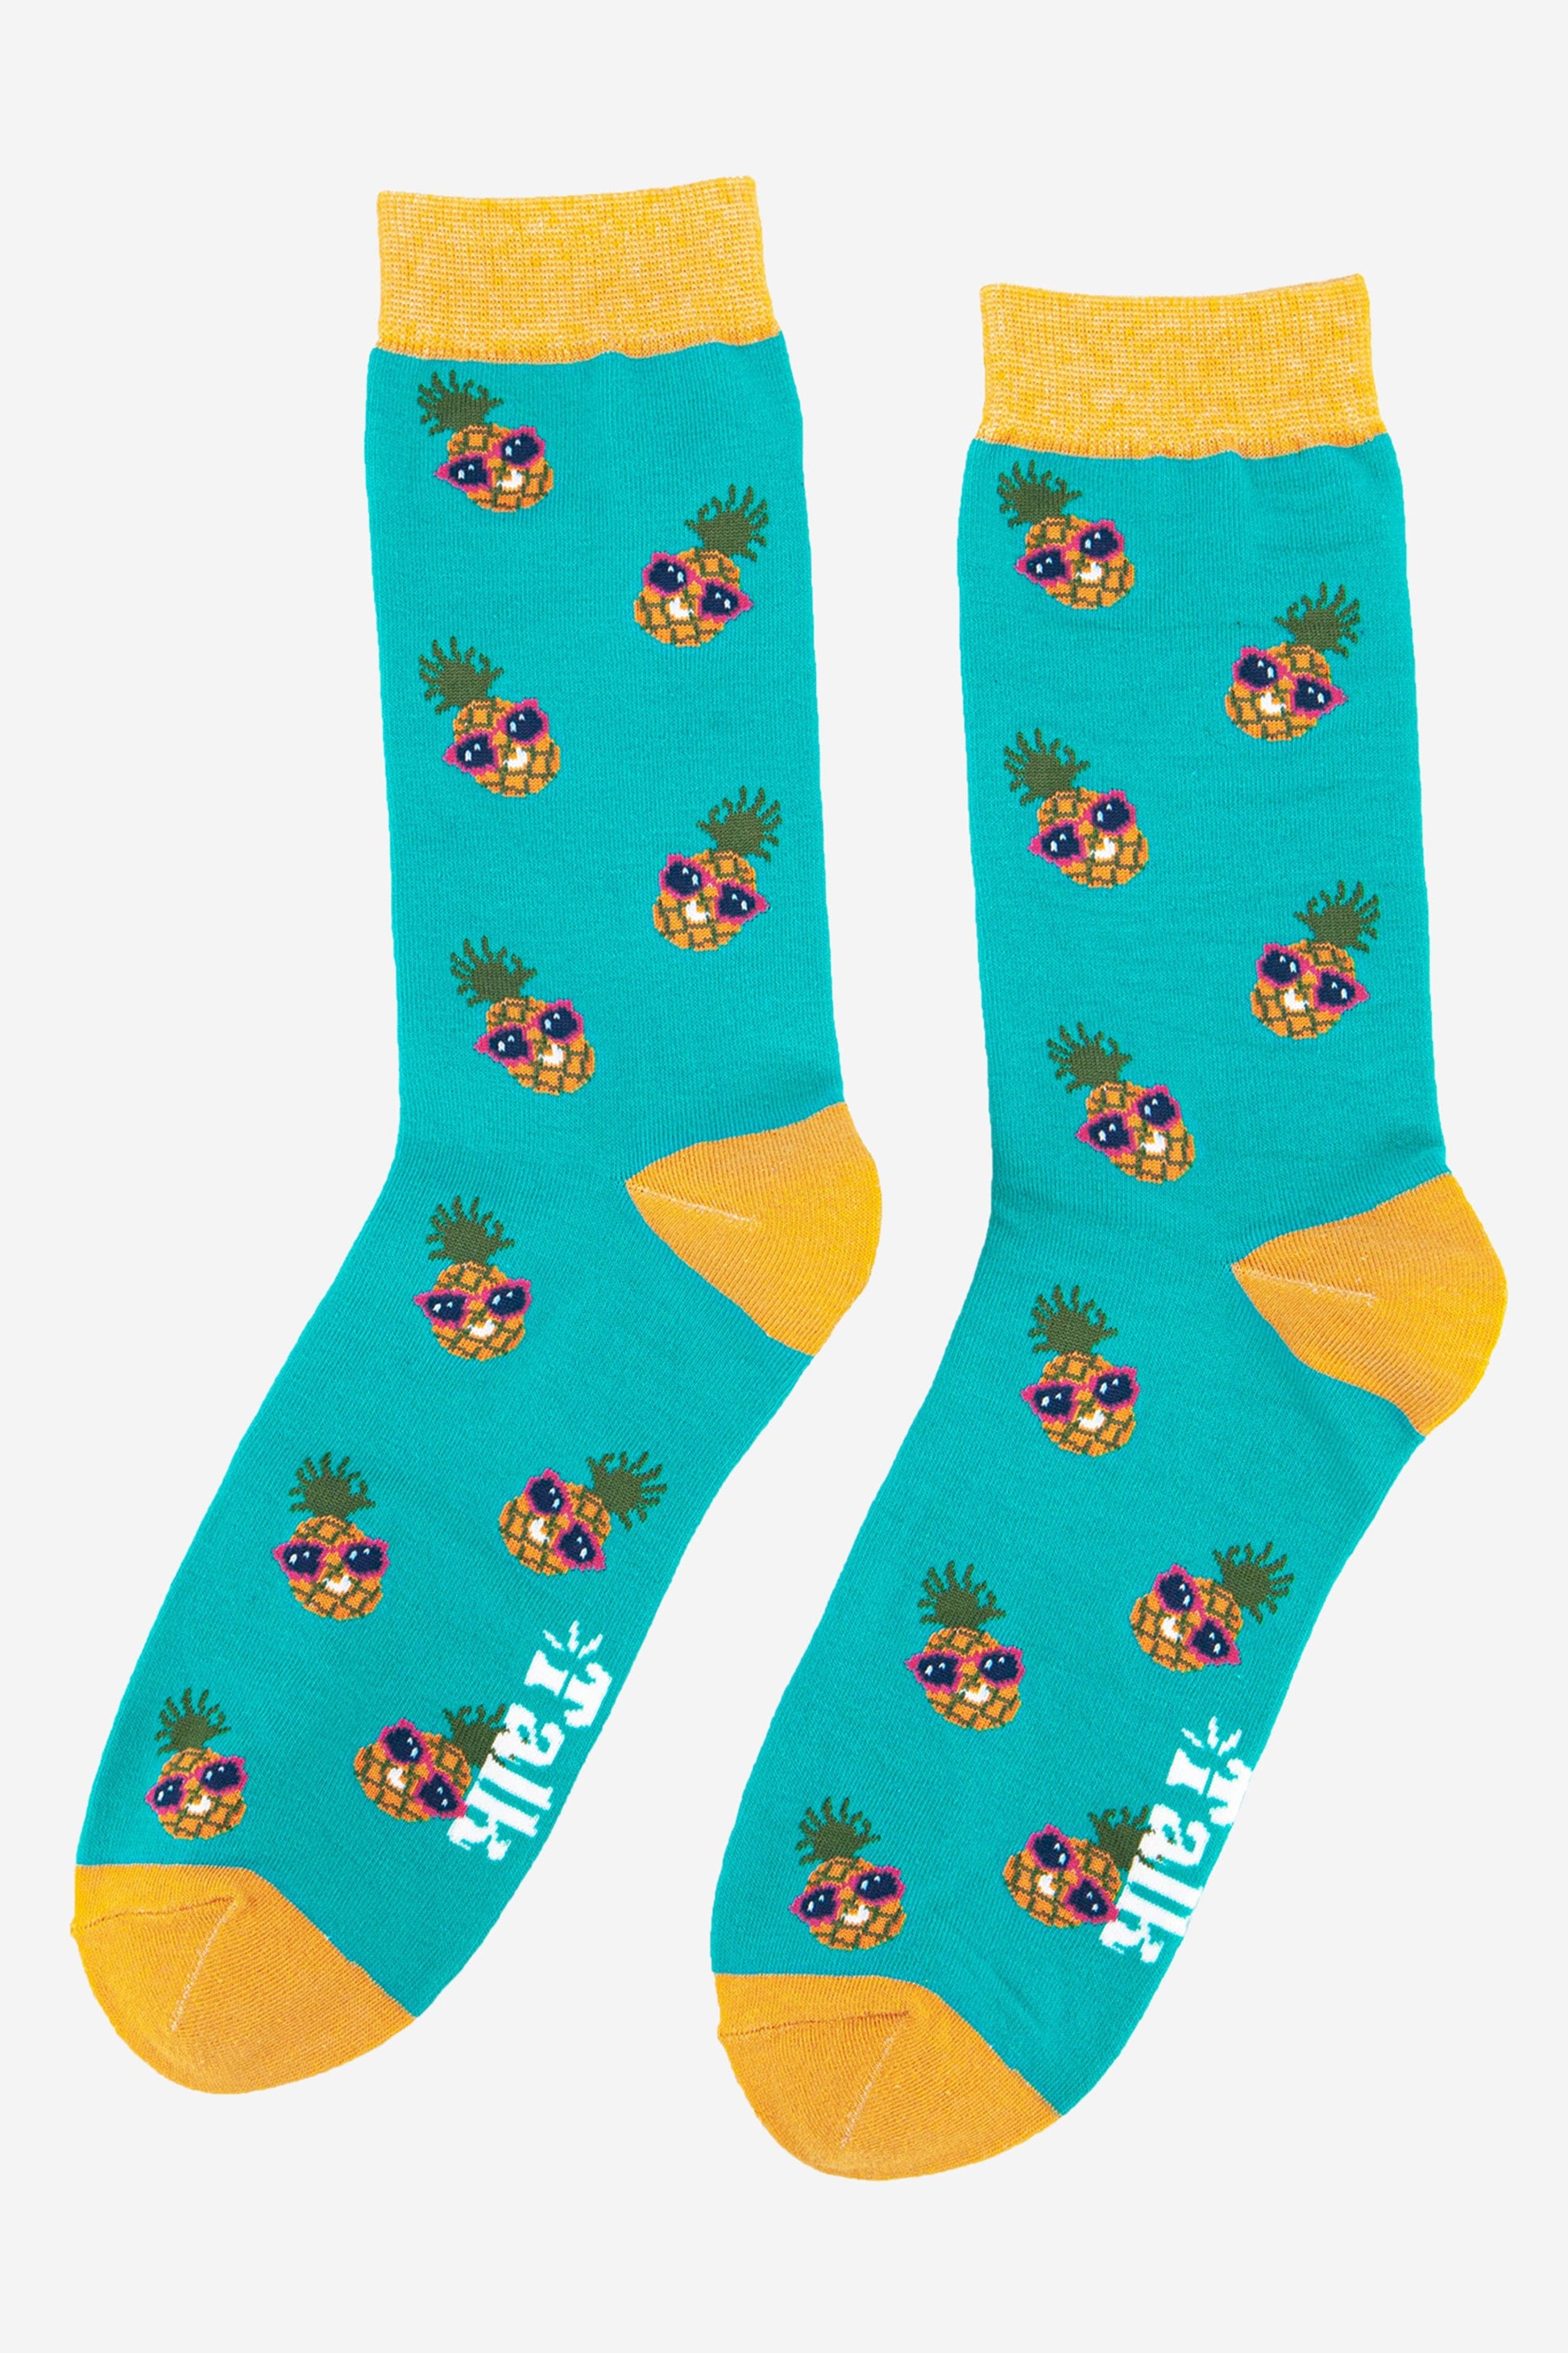 mens pineapple print bamboo socks in turquoise blue with a yellow toe, heel and cuff